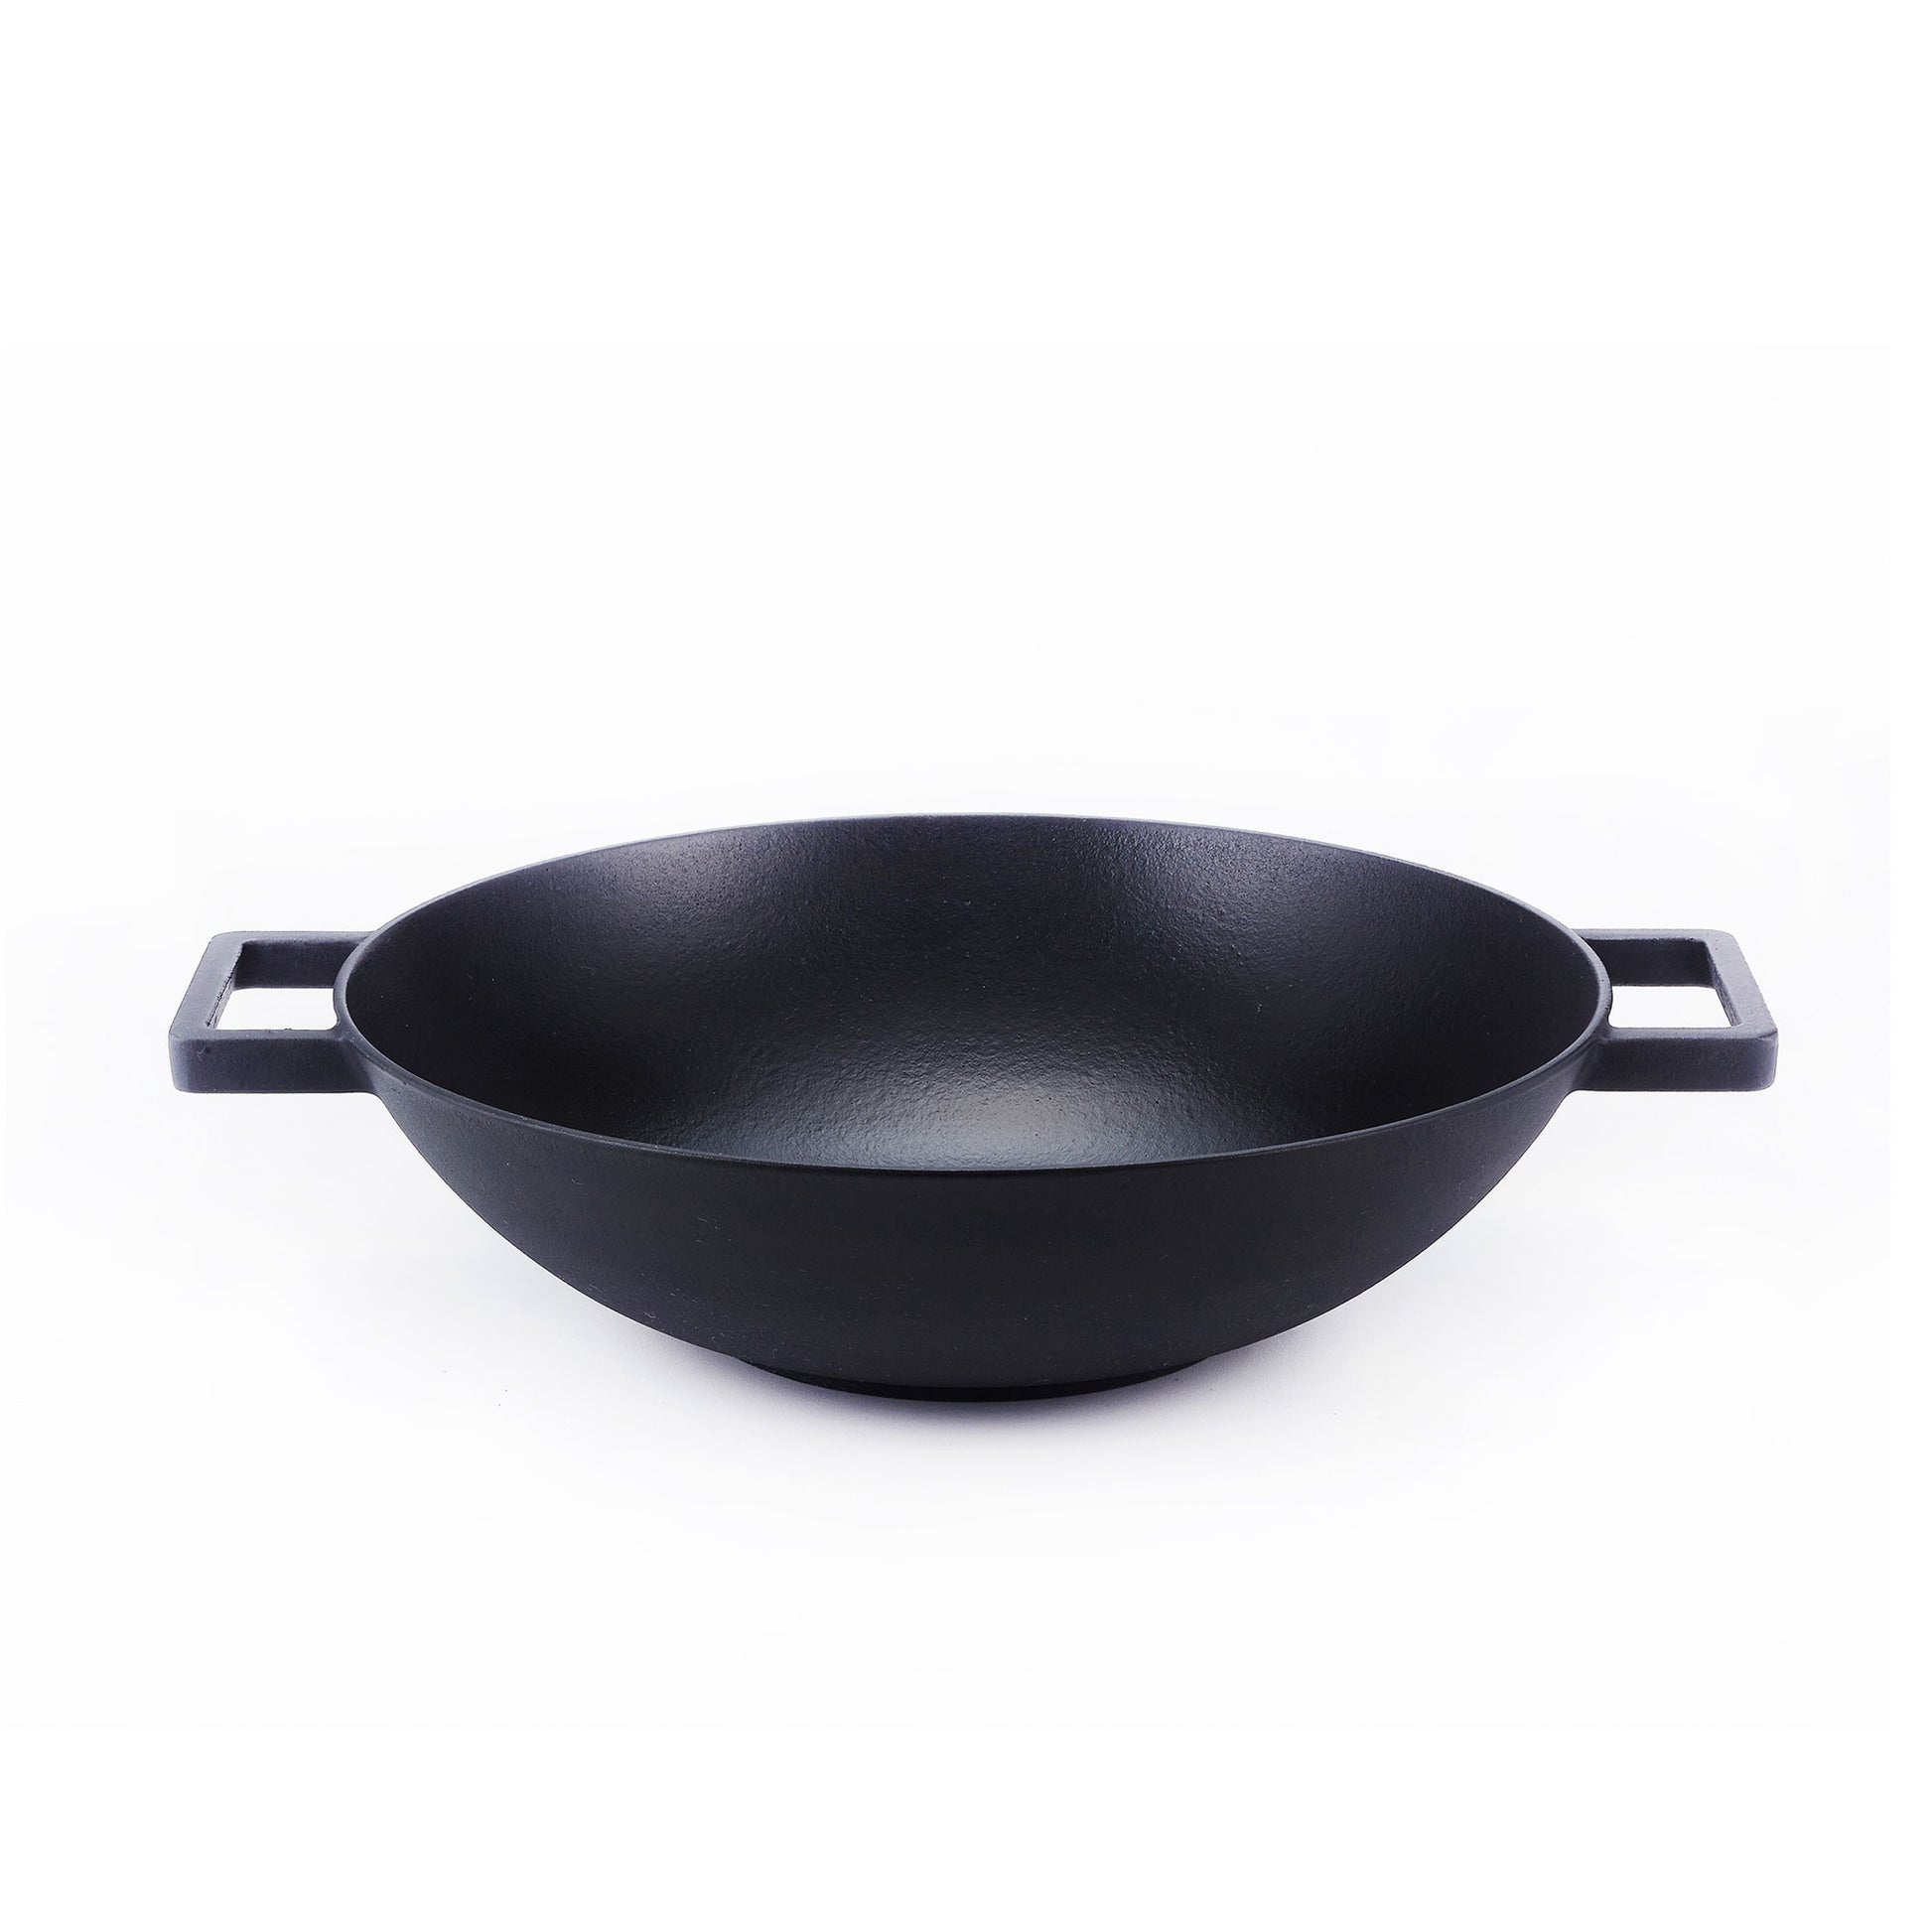 Moo Moo Stove Top Cover With or Without Oven Handle That Protects